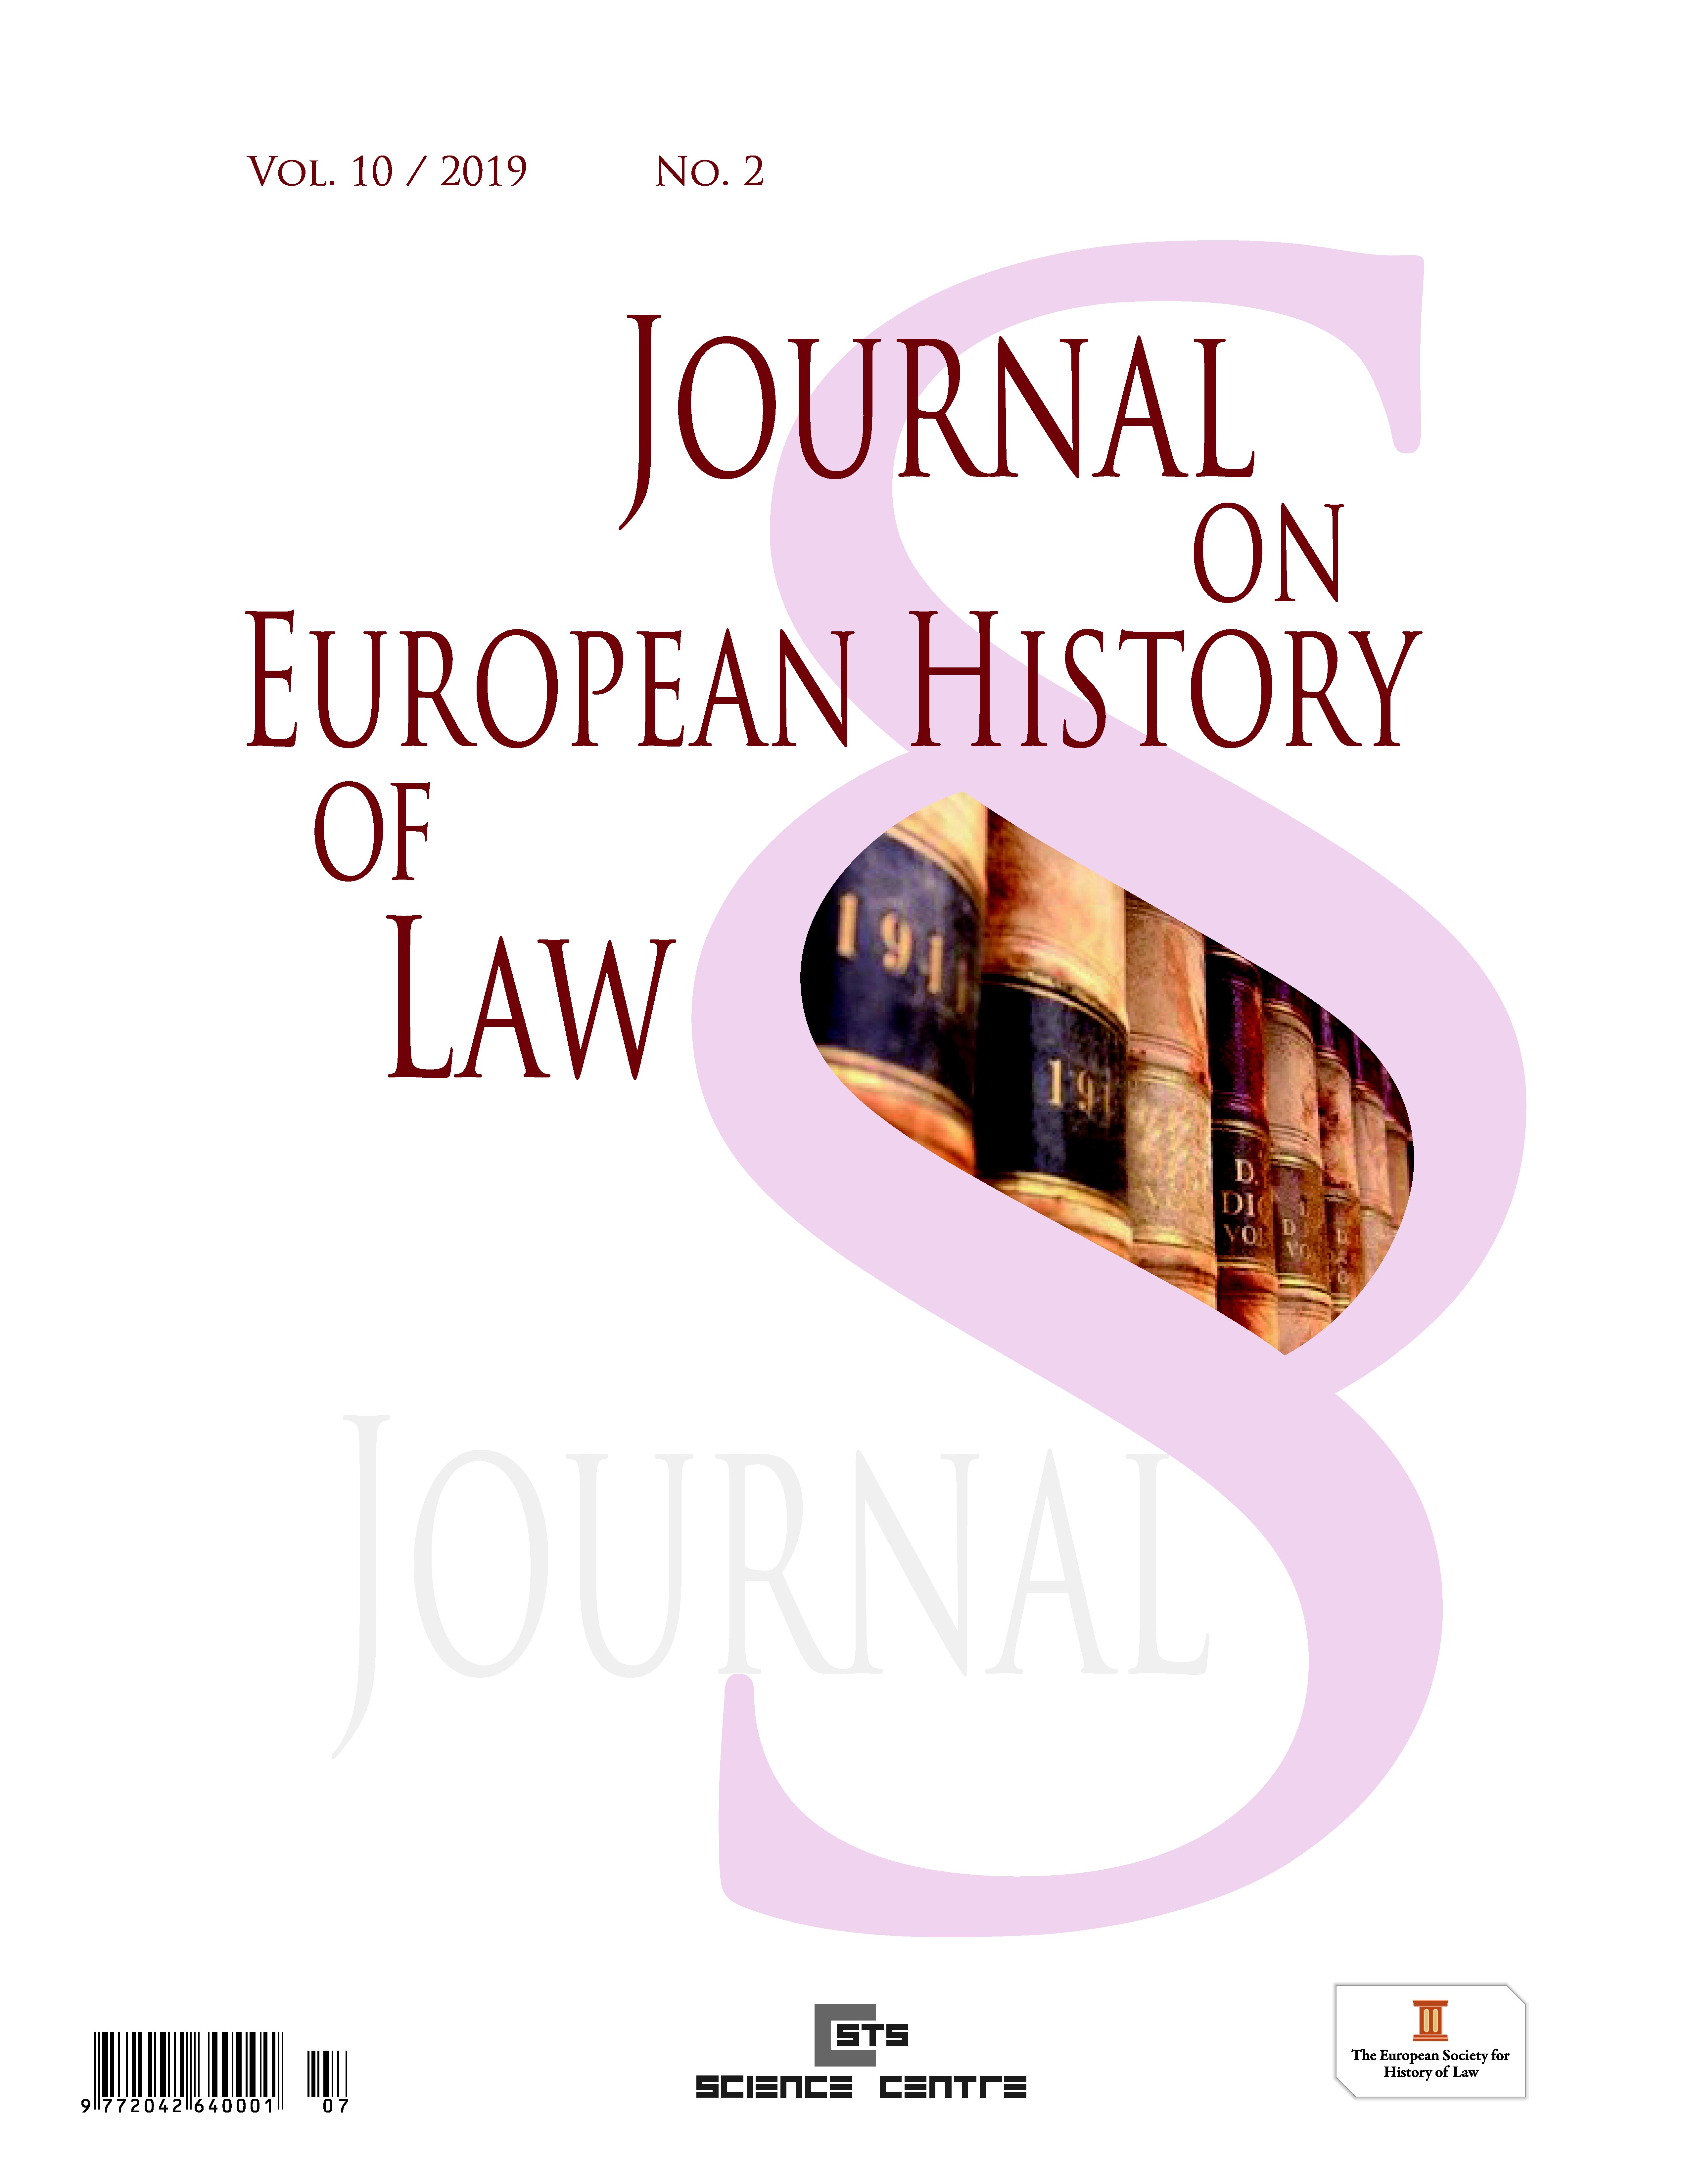 A Historical Overview of Law and Neuroscience: From the Emergence of Medico-Legal Discourses to Developed Neurolaw